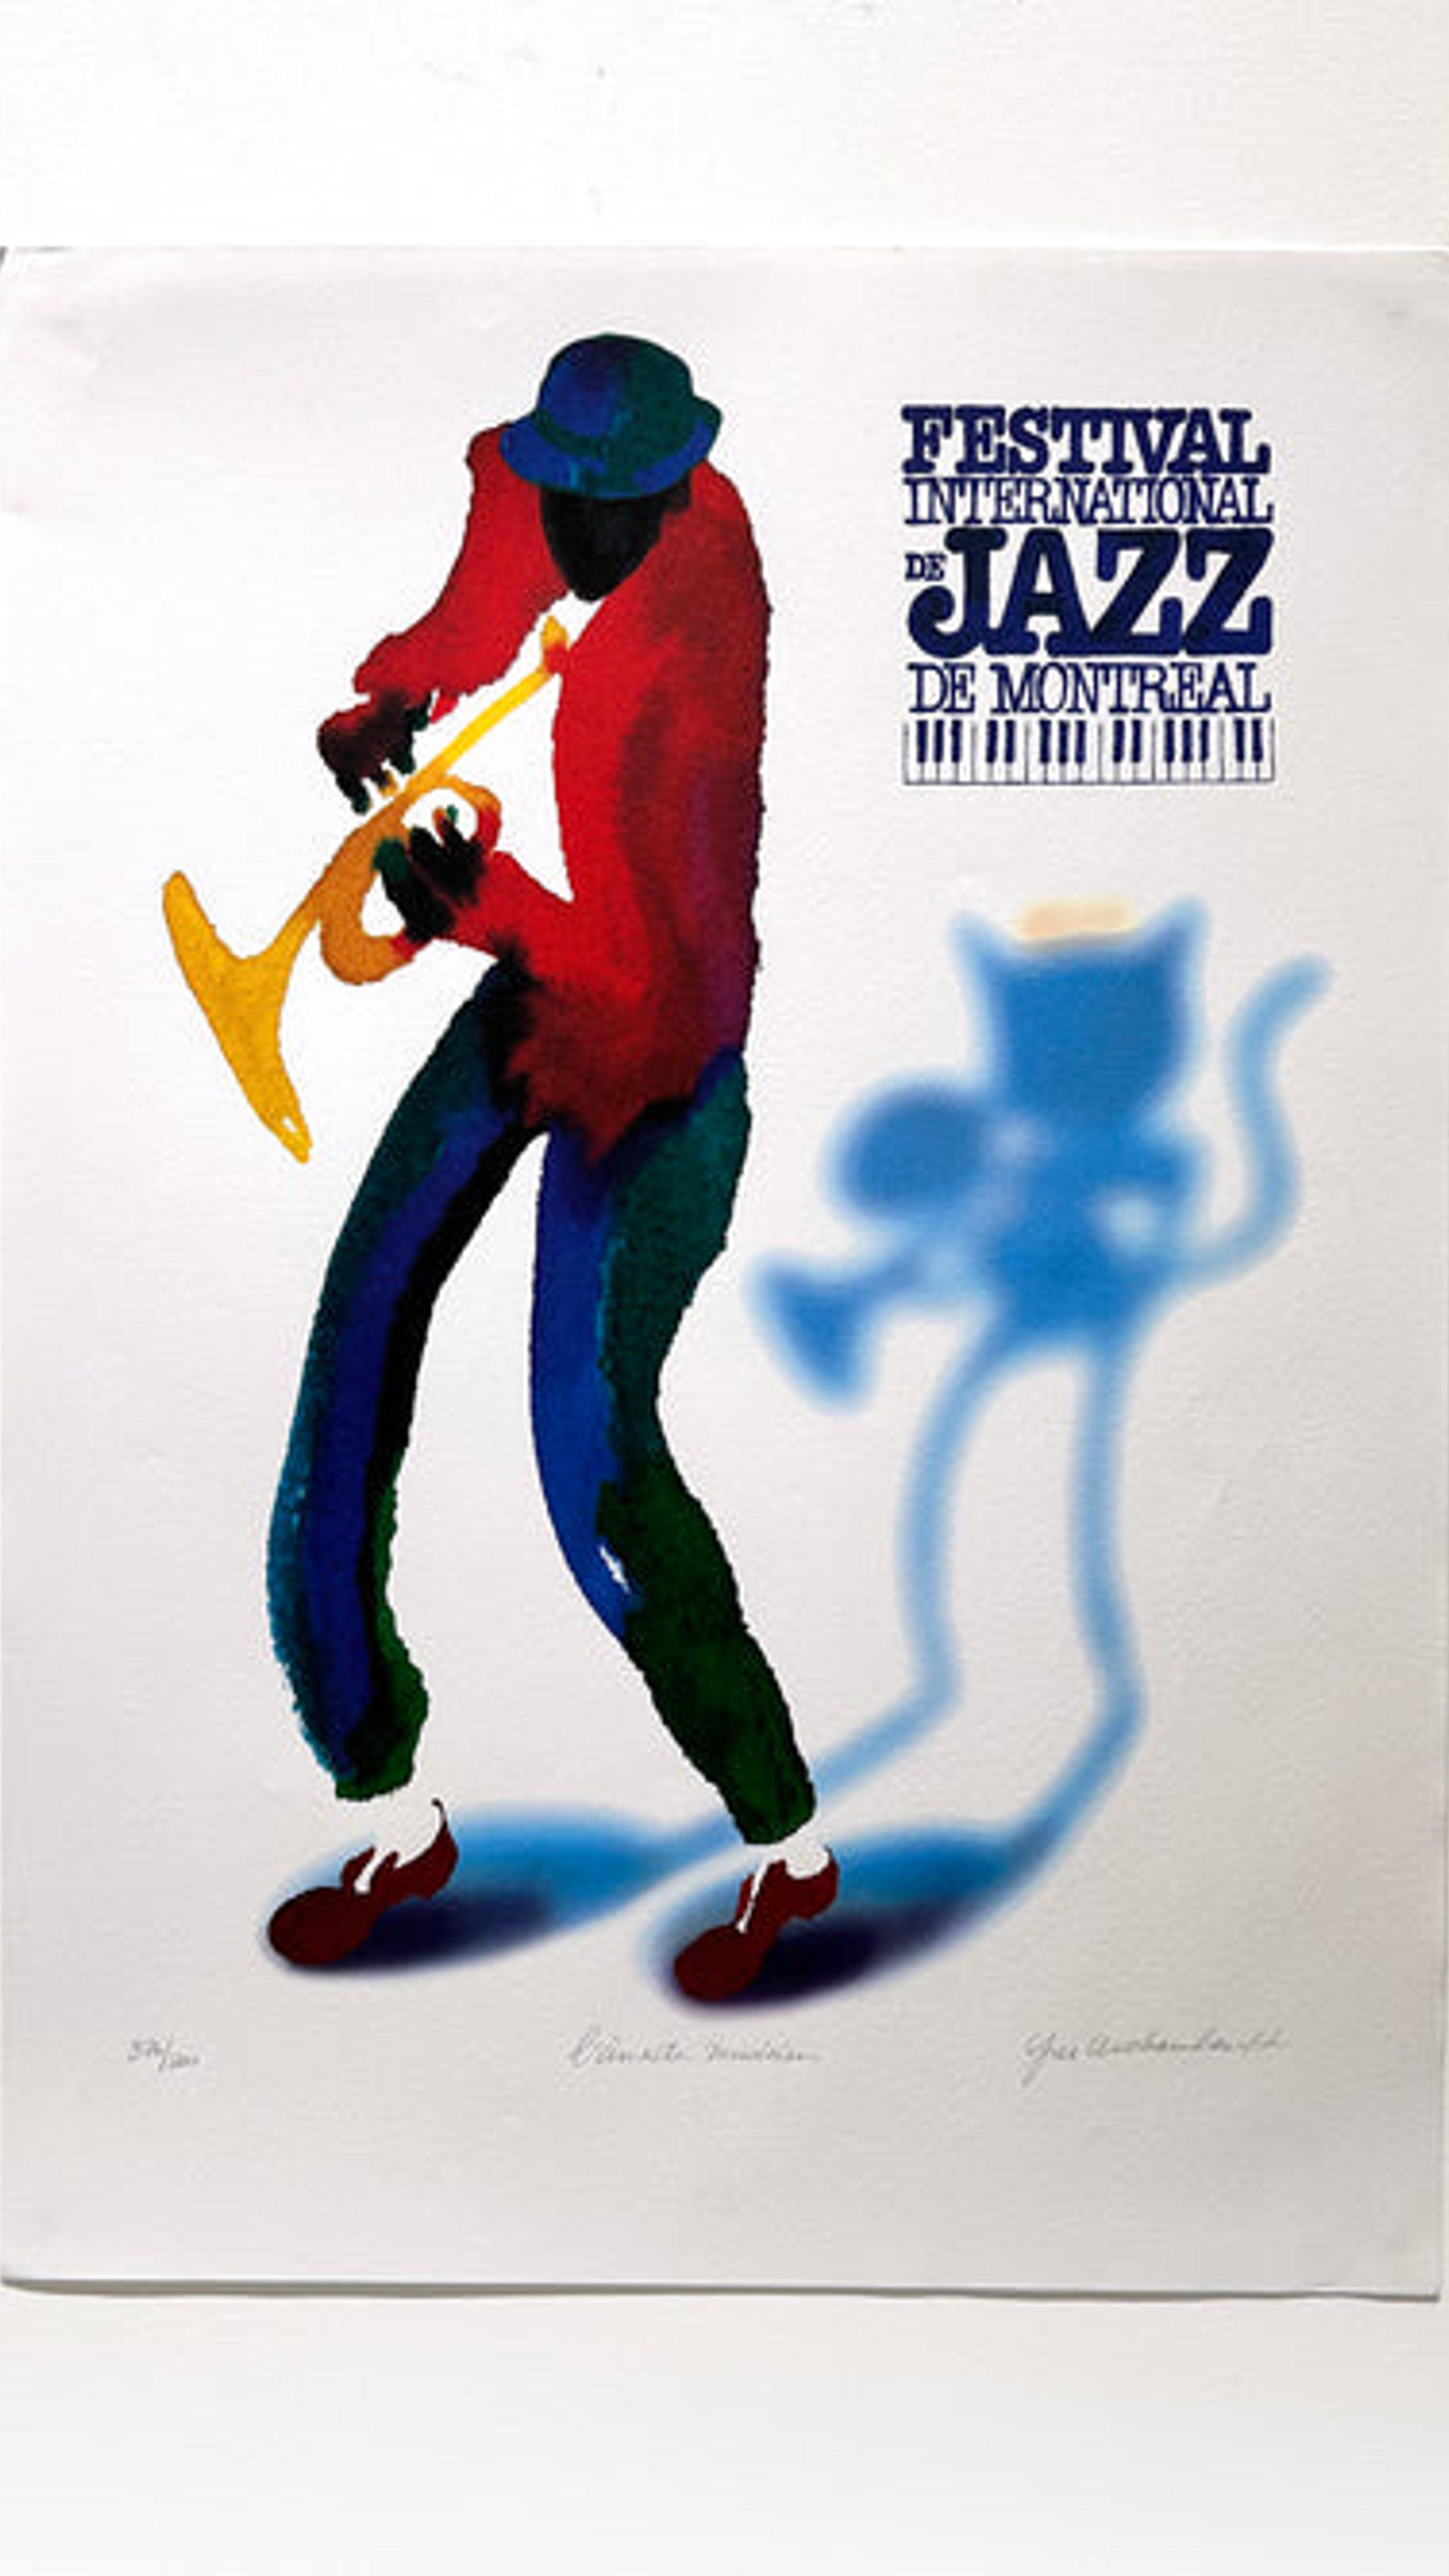 Preview image for the show titled "42 Years of The Montreal International Jazz Festival Prints! " at Today @ 7:00 PM